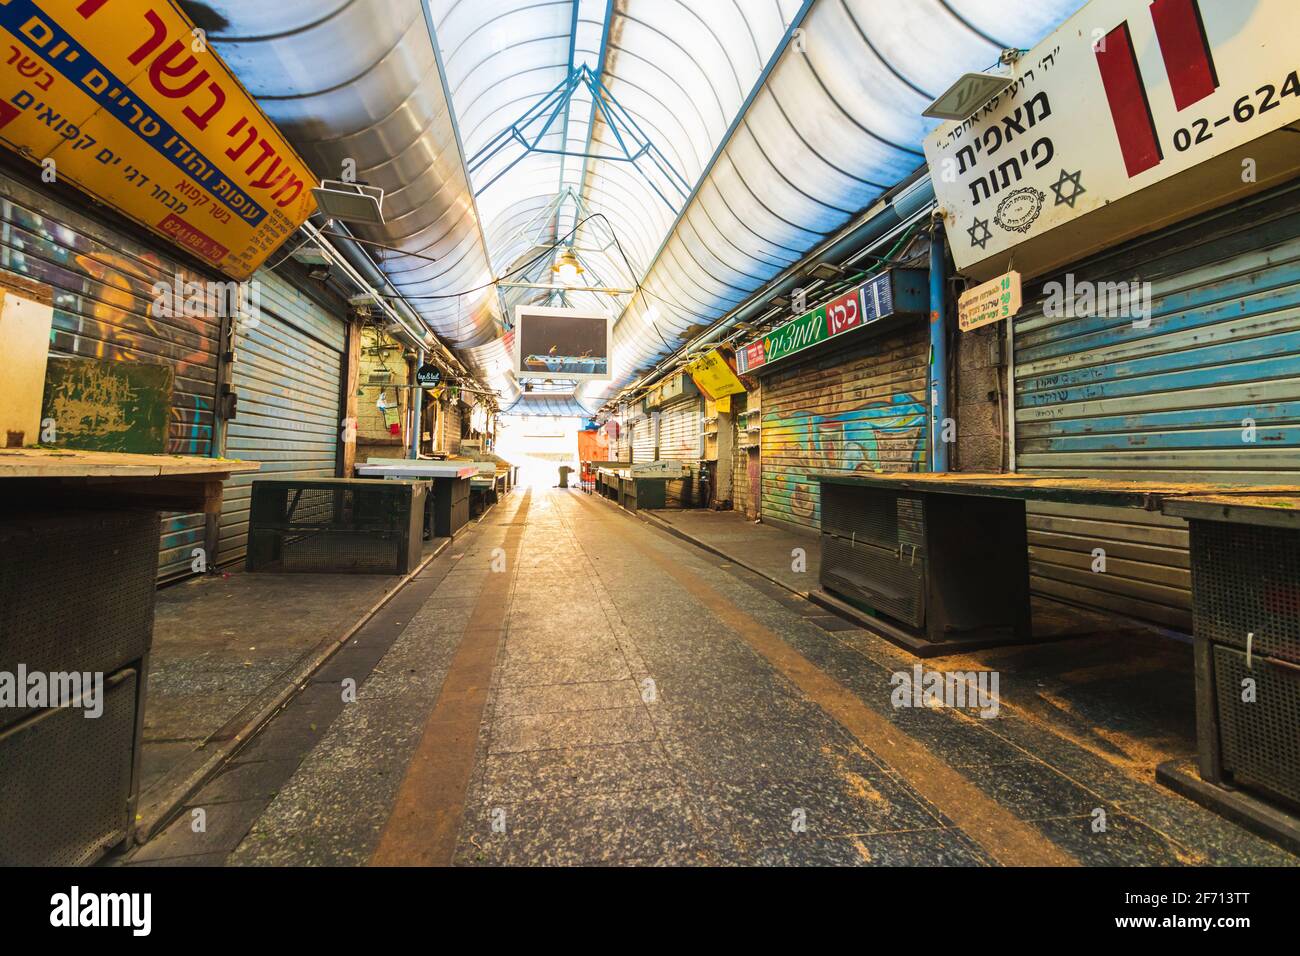 jerusalem-israel. 05-03-2021. Closed shops A few minutes before Saturday, in the Mahane Yehuda market, empty of people Stock Photo